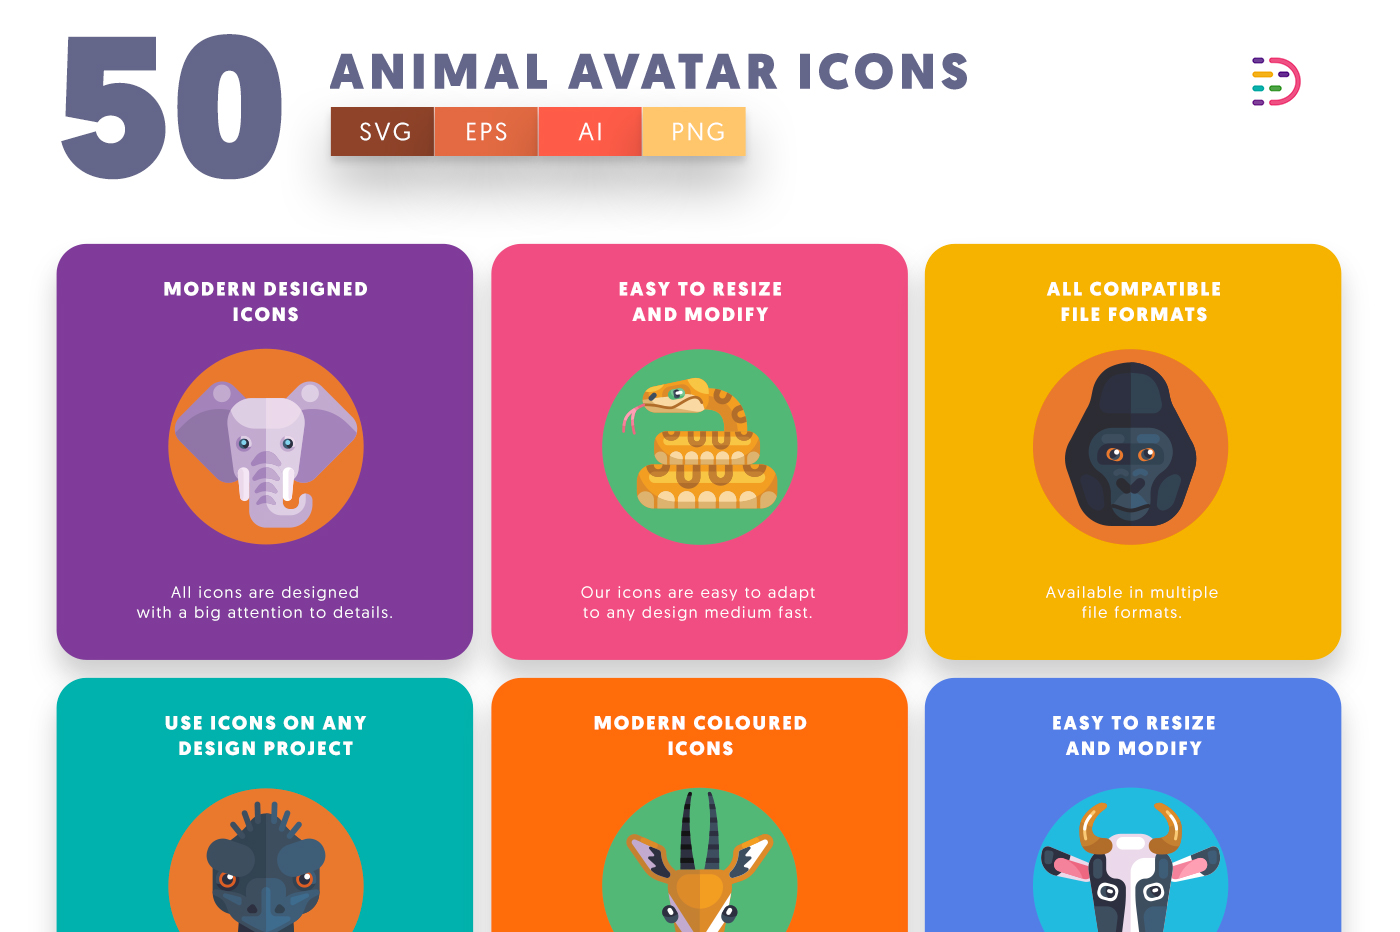  Animal Avatar Icons with colored backgrounds